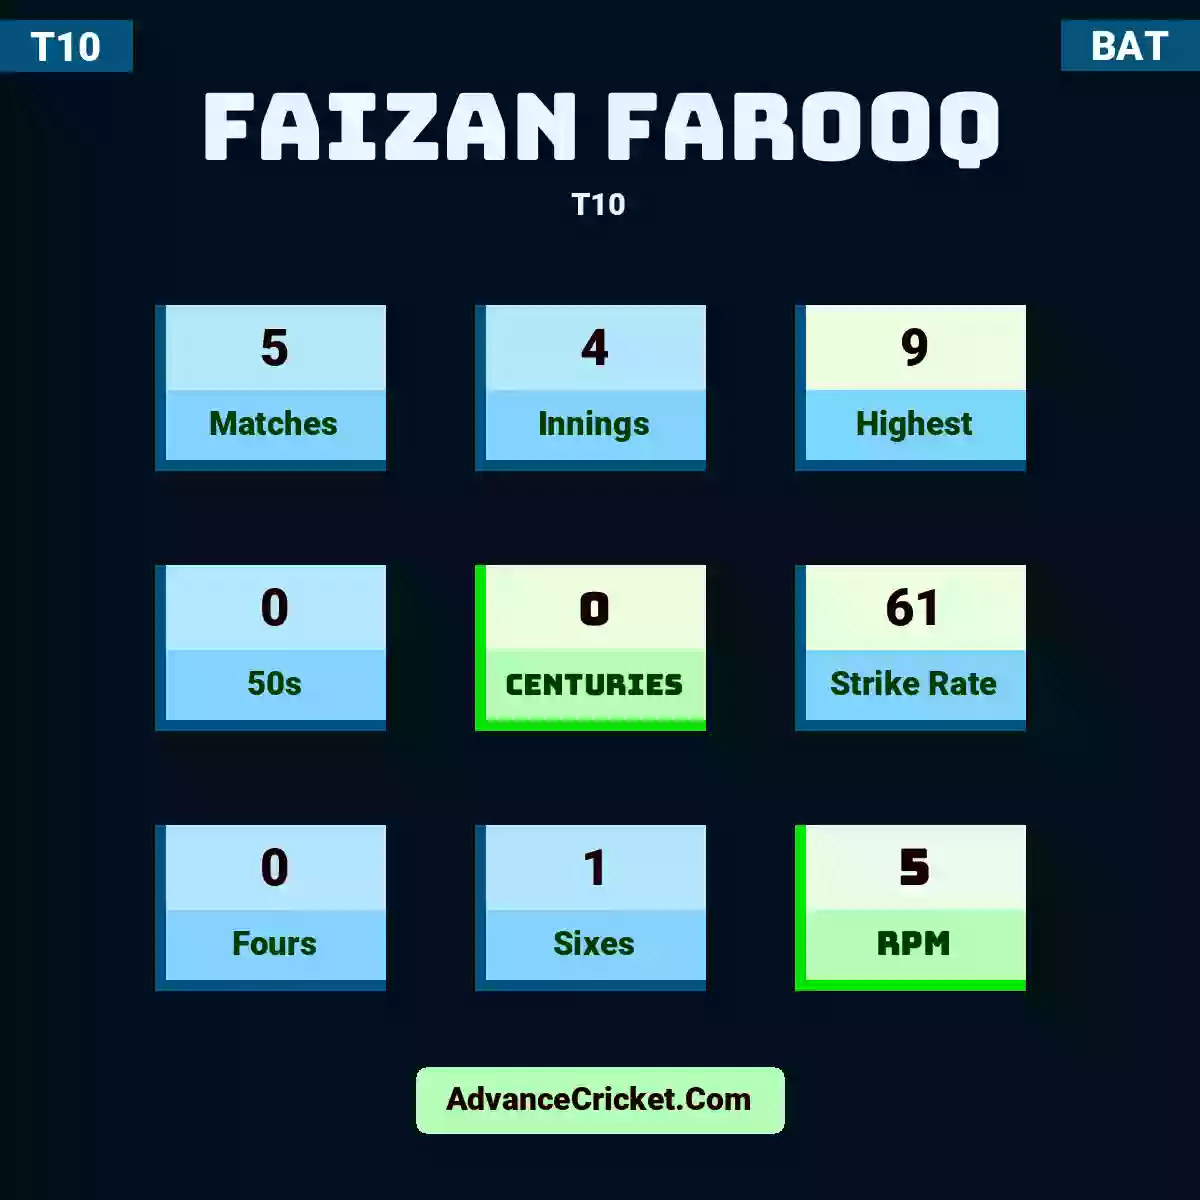 Faizan Farooq T10 , Faizan Farooq played 5 matches, scored 9 runs as highest, 0 half-centuries, and 0 centuries, with a strike rate of 61. F.Farooq hit 0 fours and 1 sixes, with an RPM of 5.